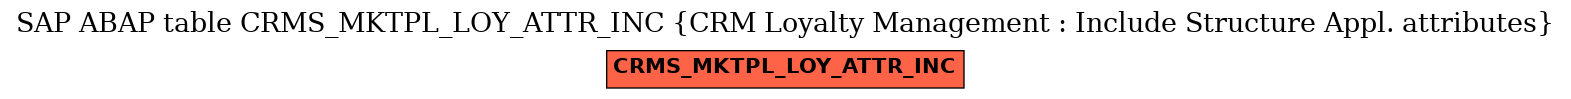 E-R Diagram for table CRMS_MKTPL_LOY_ATTR_INC (CRM Loyalty Management : Include Structure Appl. attributes)